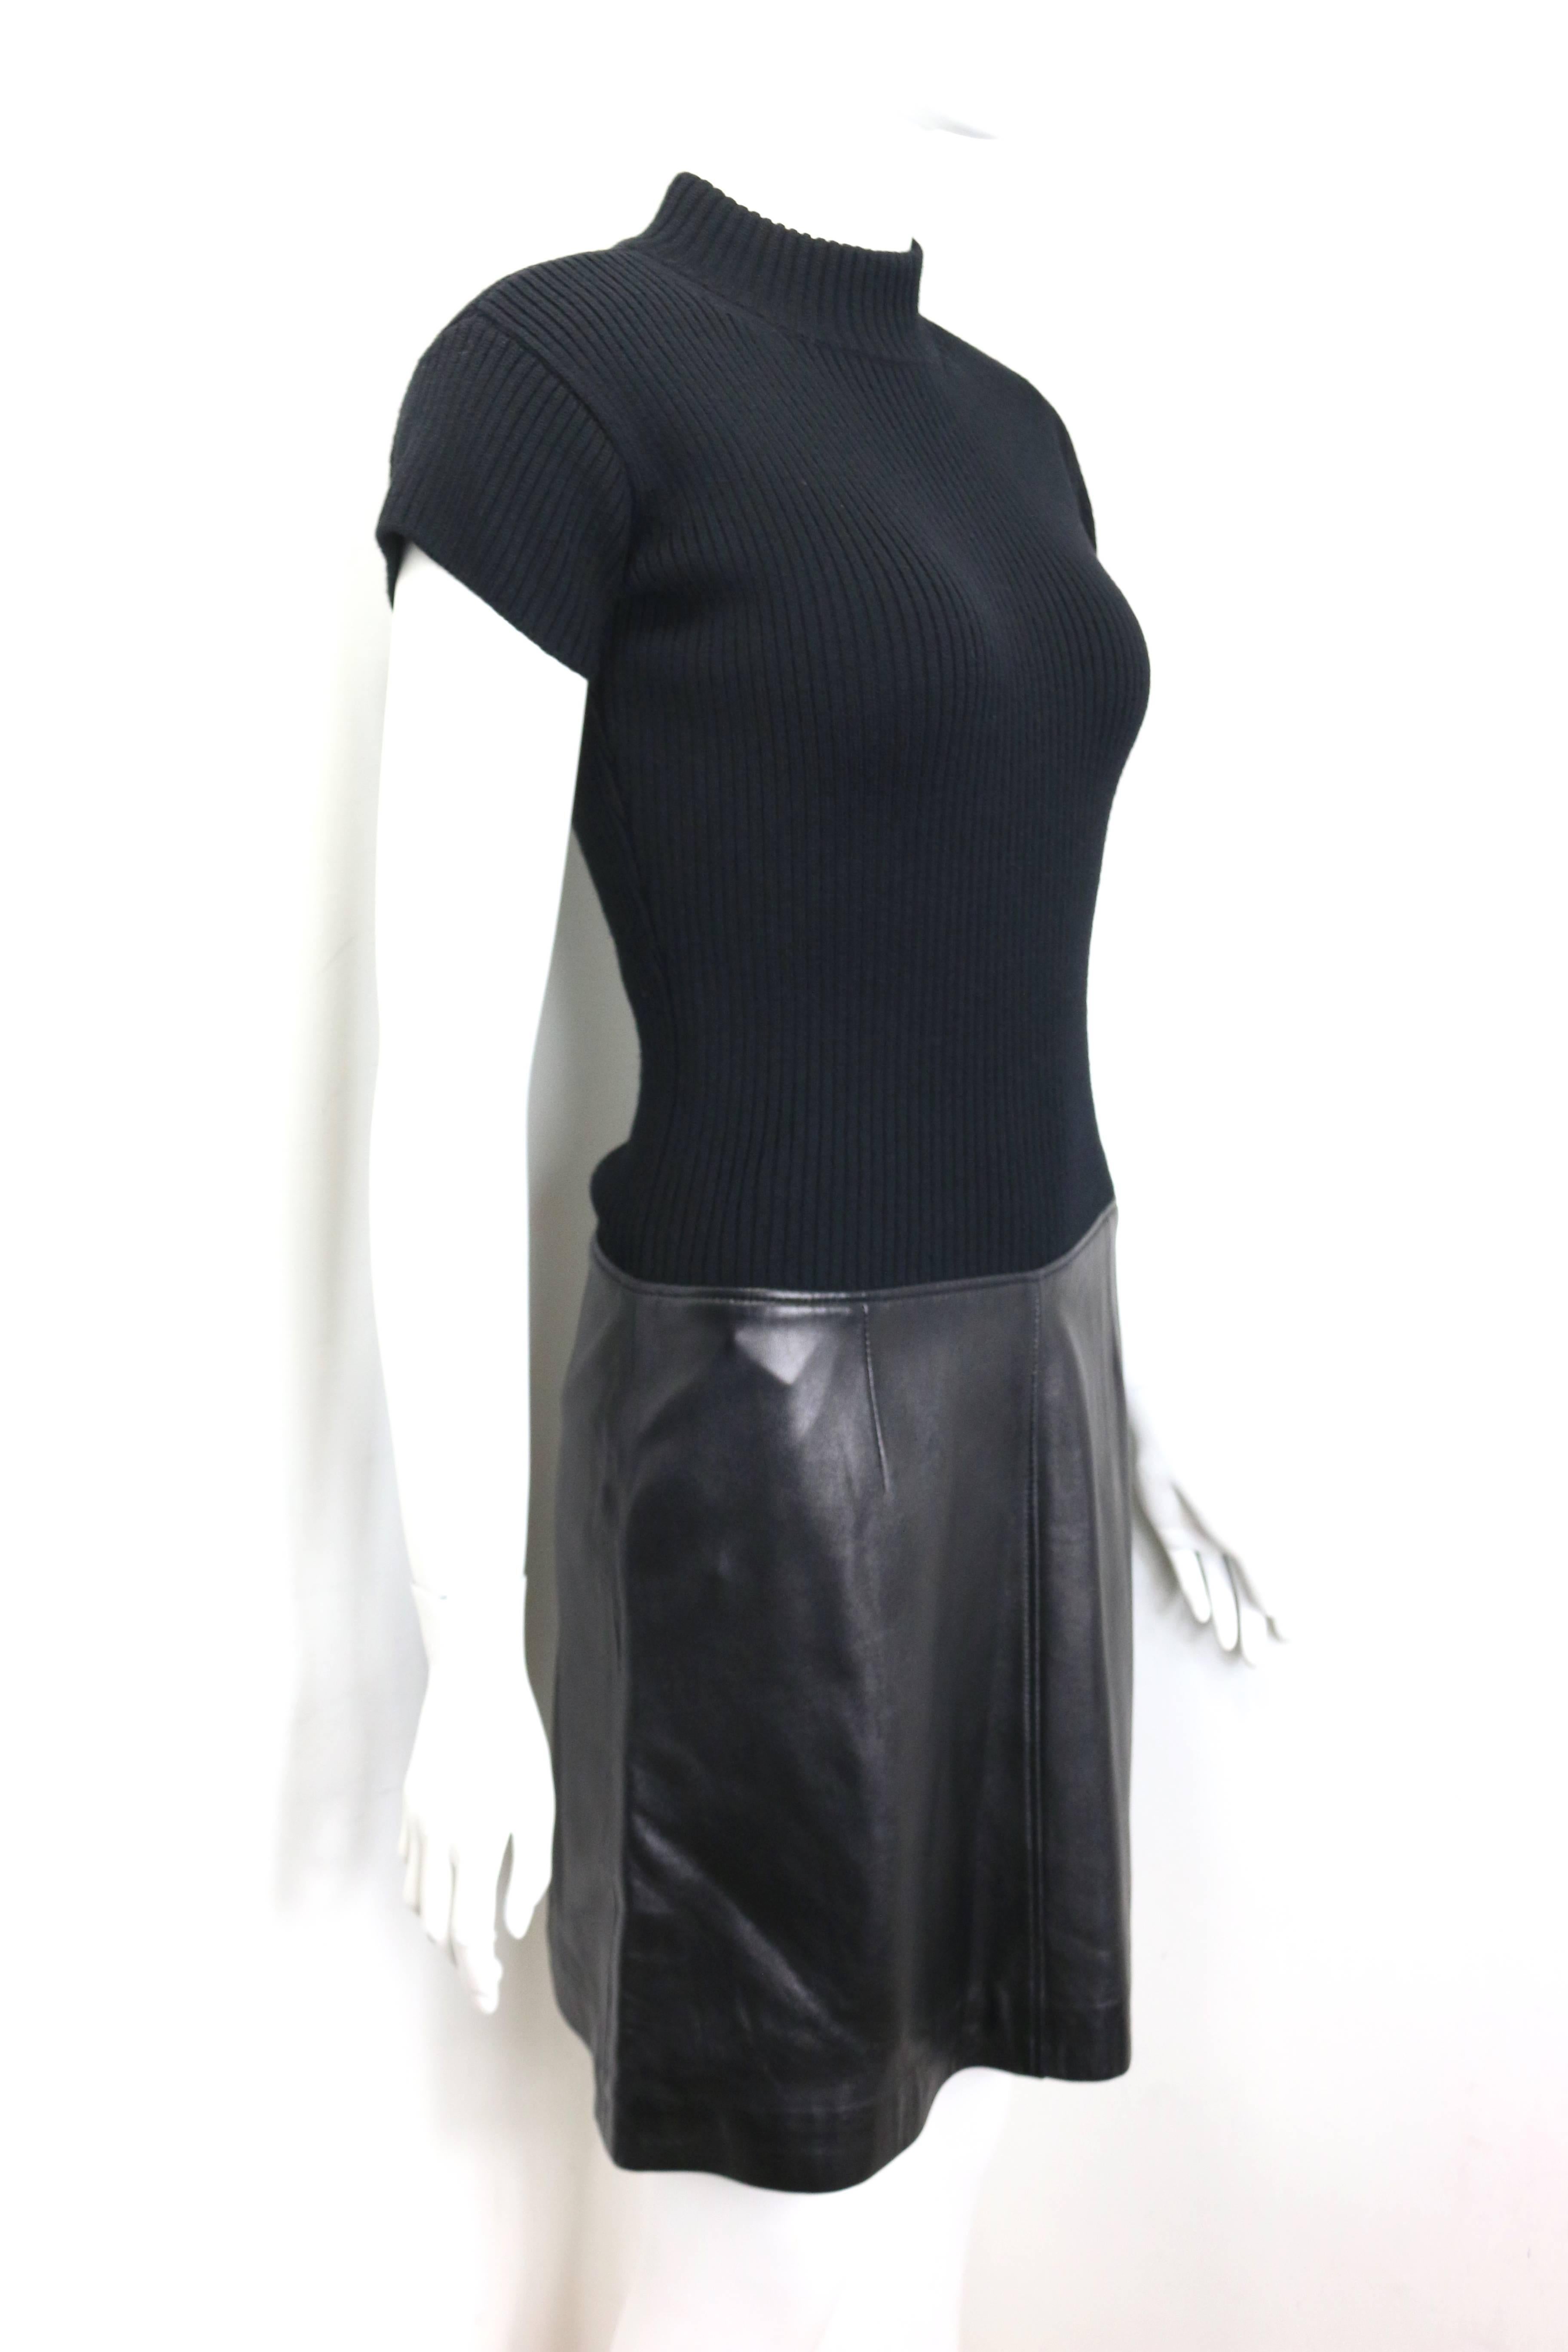 - Vintage 90s Anteprima black wool and lambskin leather short sleeves dress. 

- Side zip closure. 

- Size M. 

- Shoulder: 16 inches. Bust: 30 inches. Height: 36 inches. 

- 100% Wool, 100% Lambskin Leather. 

